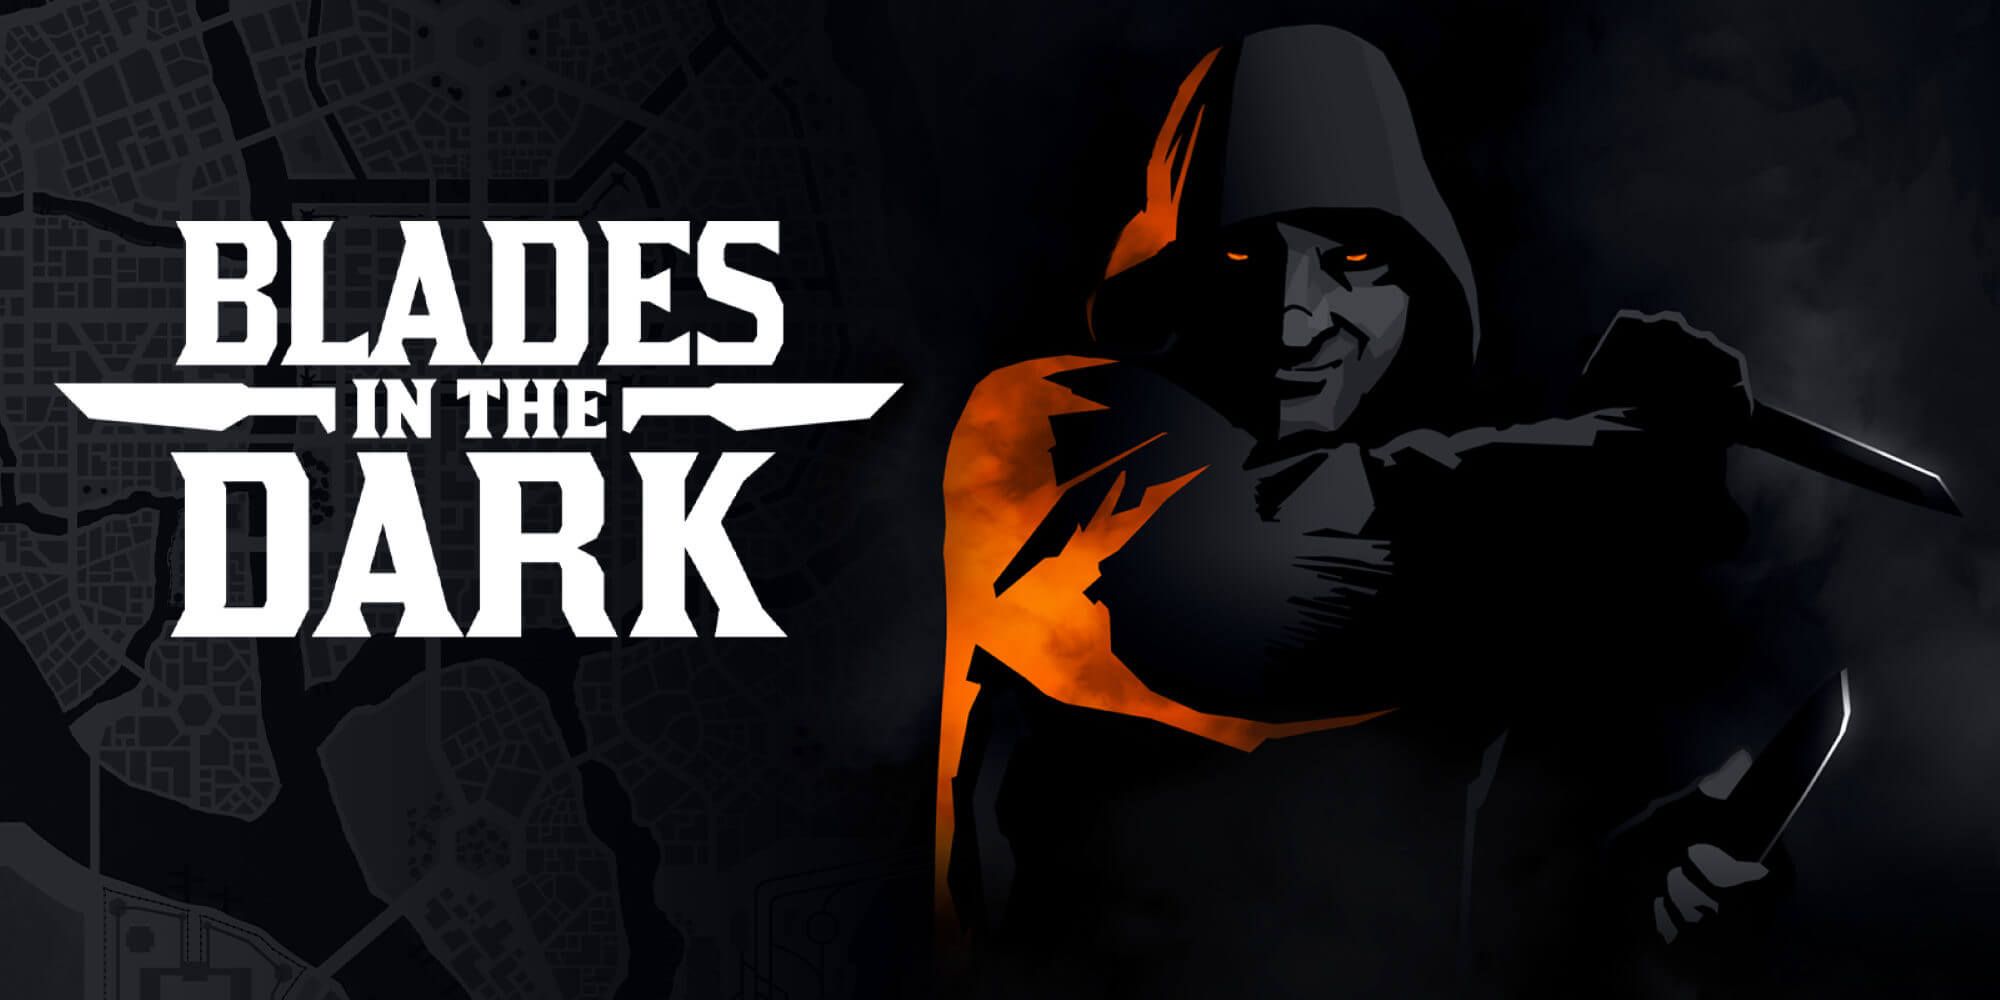 Art showing a hooded figure smiling while holding a dagger. The text "BLADES IN THE DARK" appears on the left.